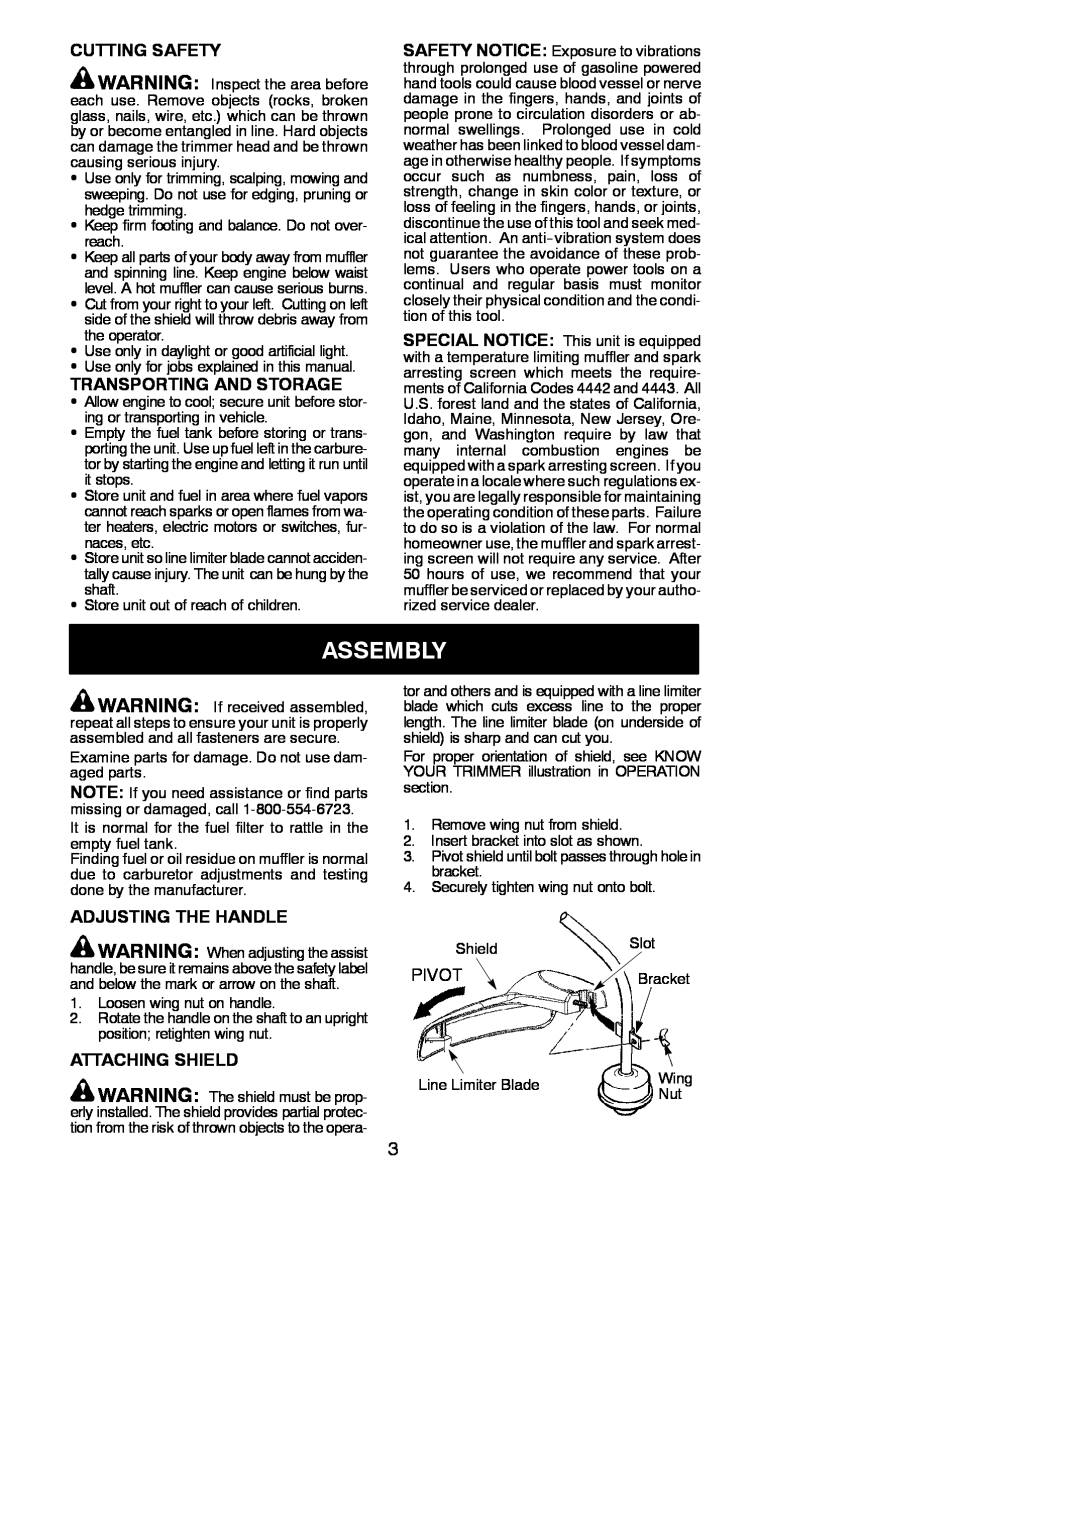 Sears FL20 instruction manual Assembly, Cutting Safety, Transporting And Storage, Adjusting The Handle, Attaching Shield 